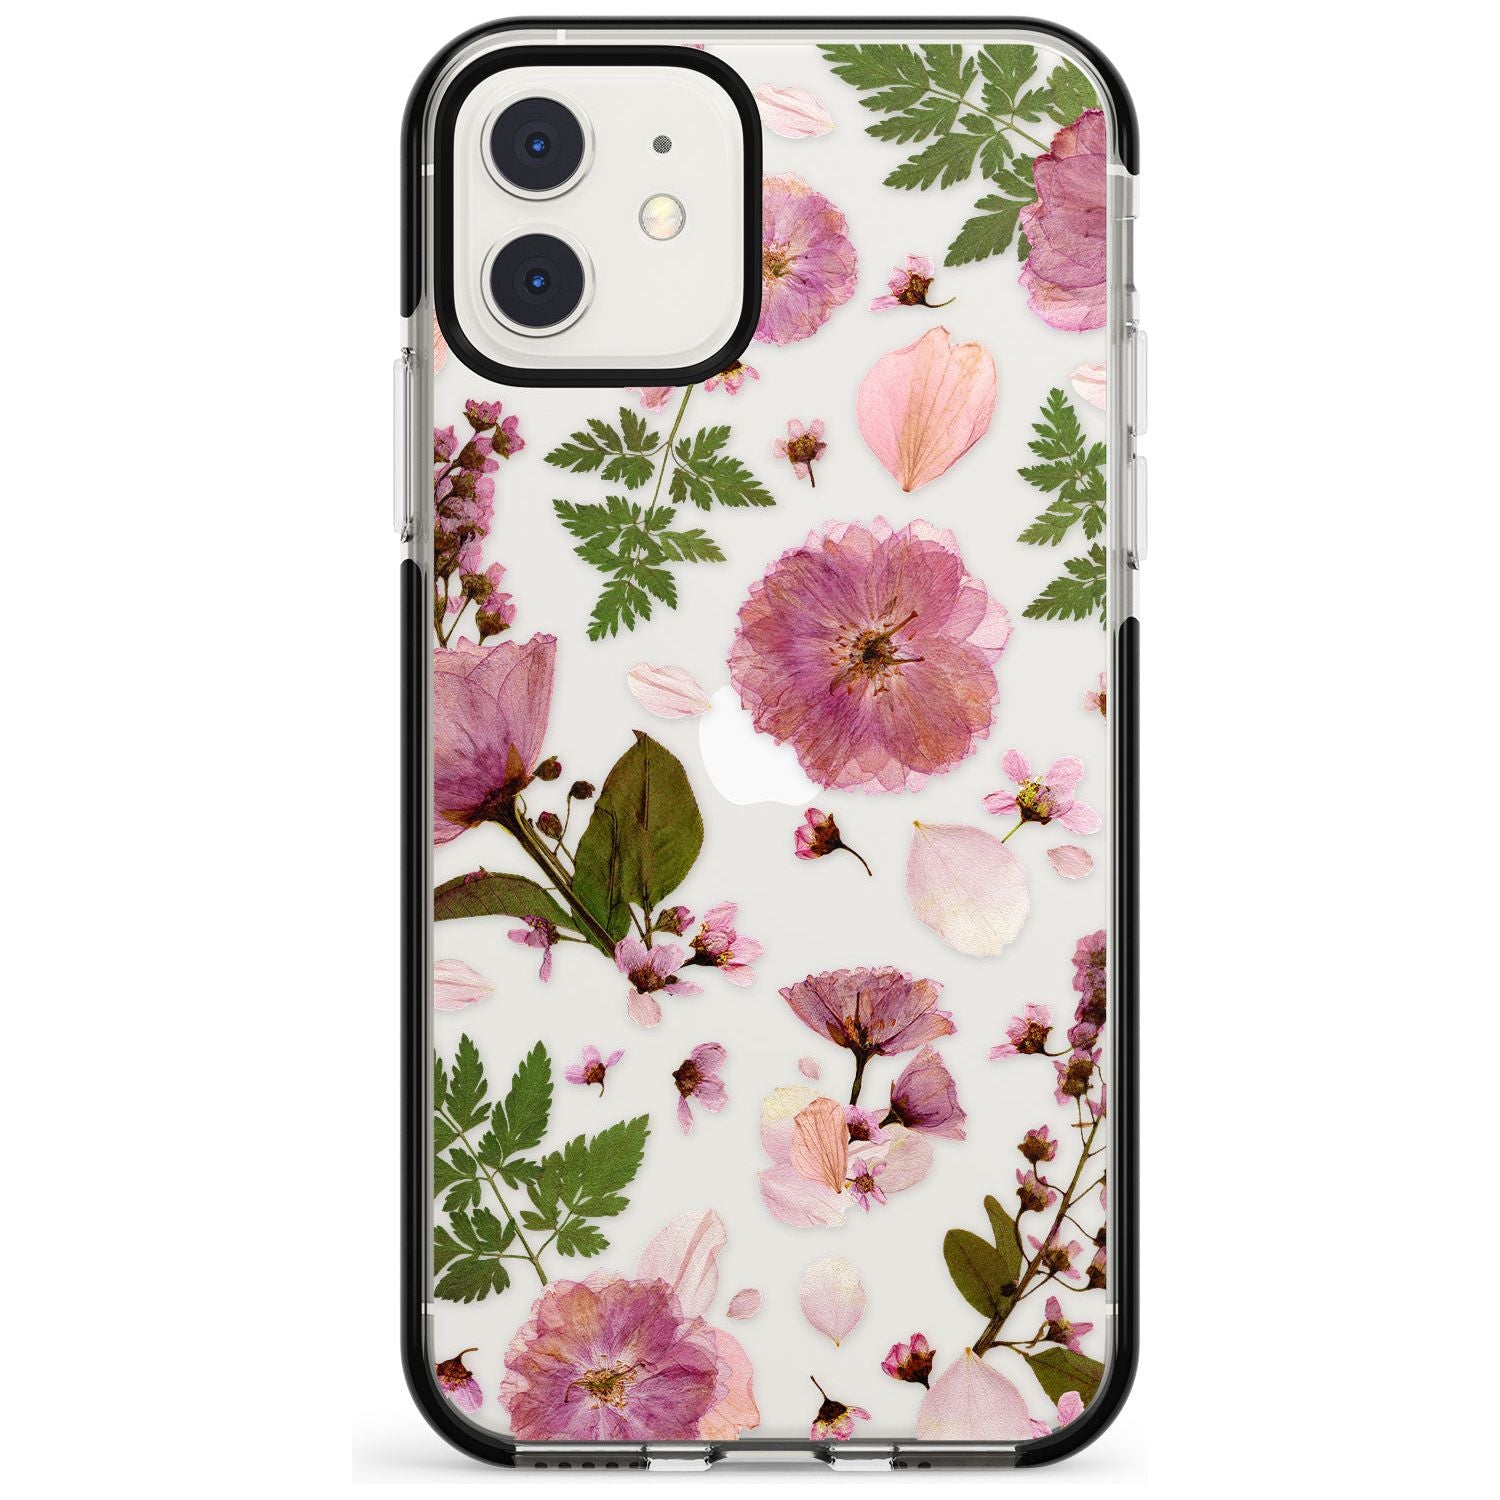 Natural Arrangement of Flowers & Leaves Design Black Impact Phone Case for iPhone 11